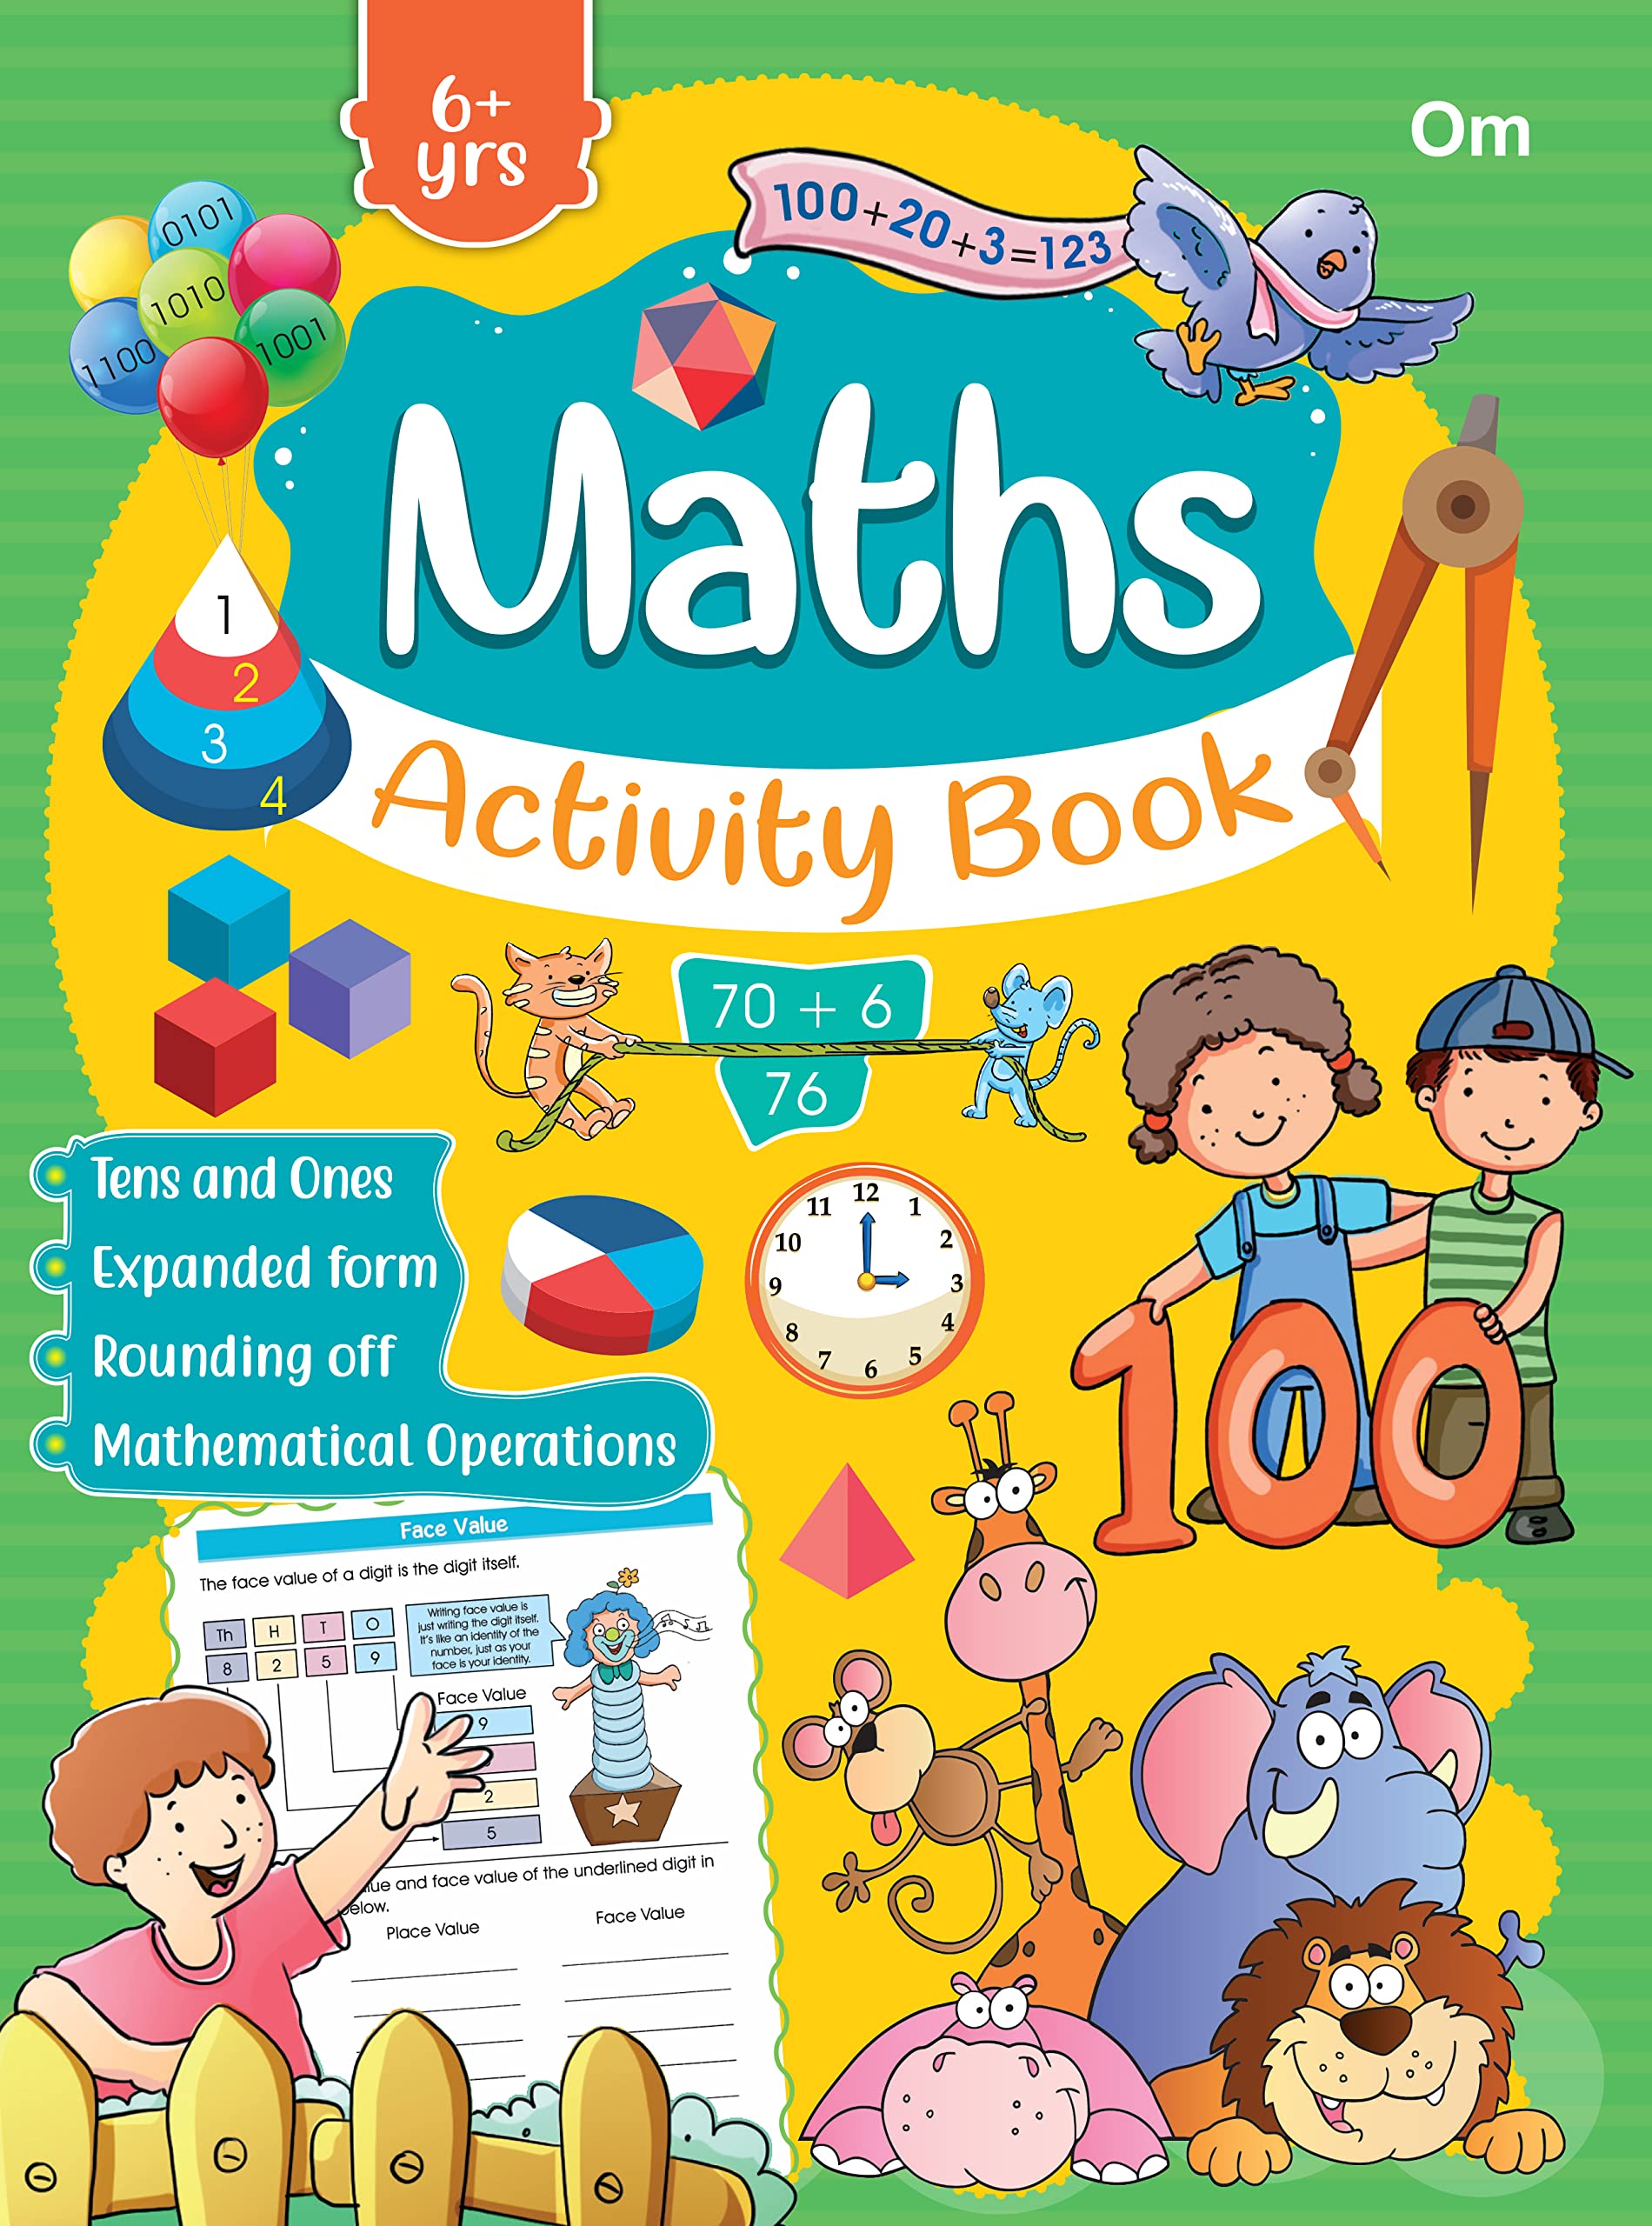 Activity Book : Maths Activity Book- Colourful activities for kids -  Education in Sri Lanka from Arcade Online Shopping - Just Rs. 2490!